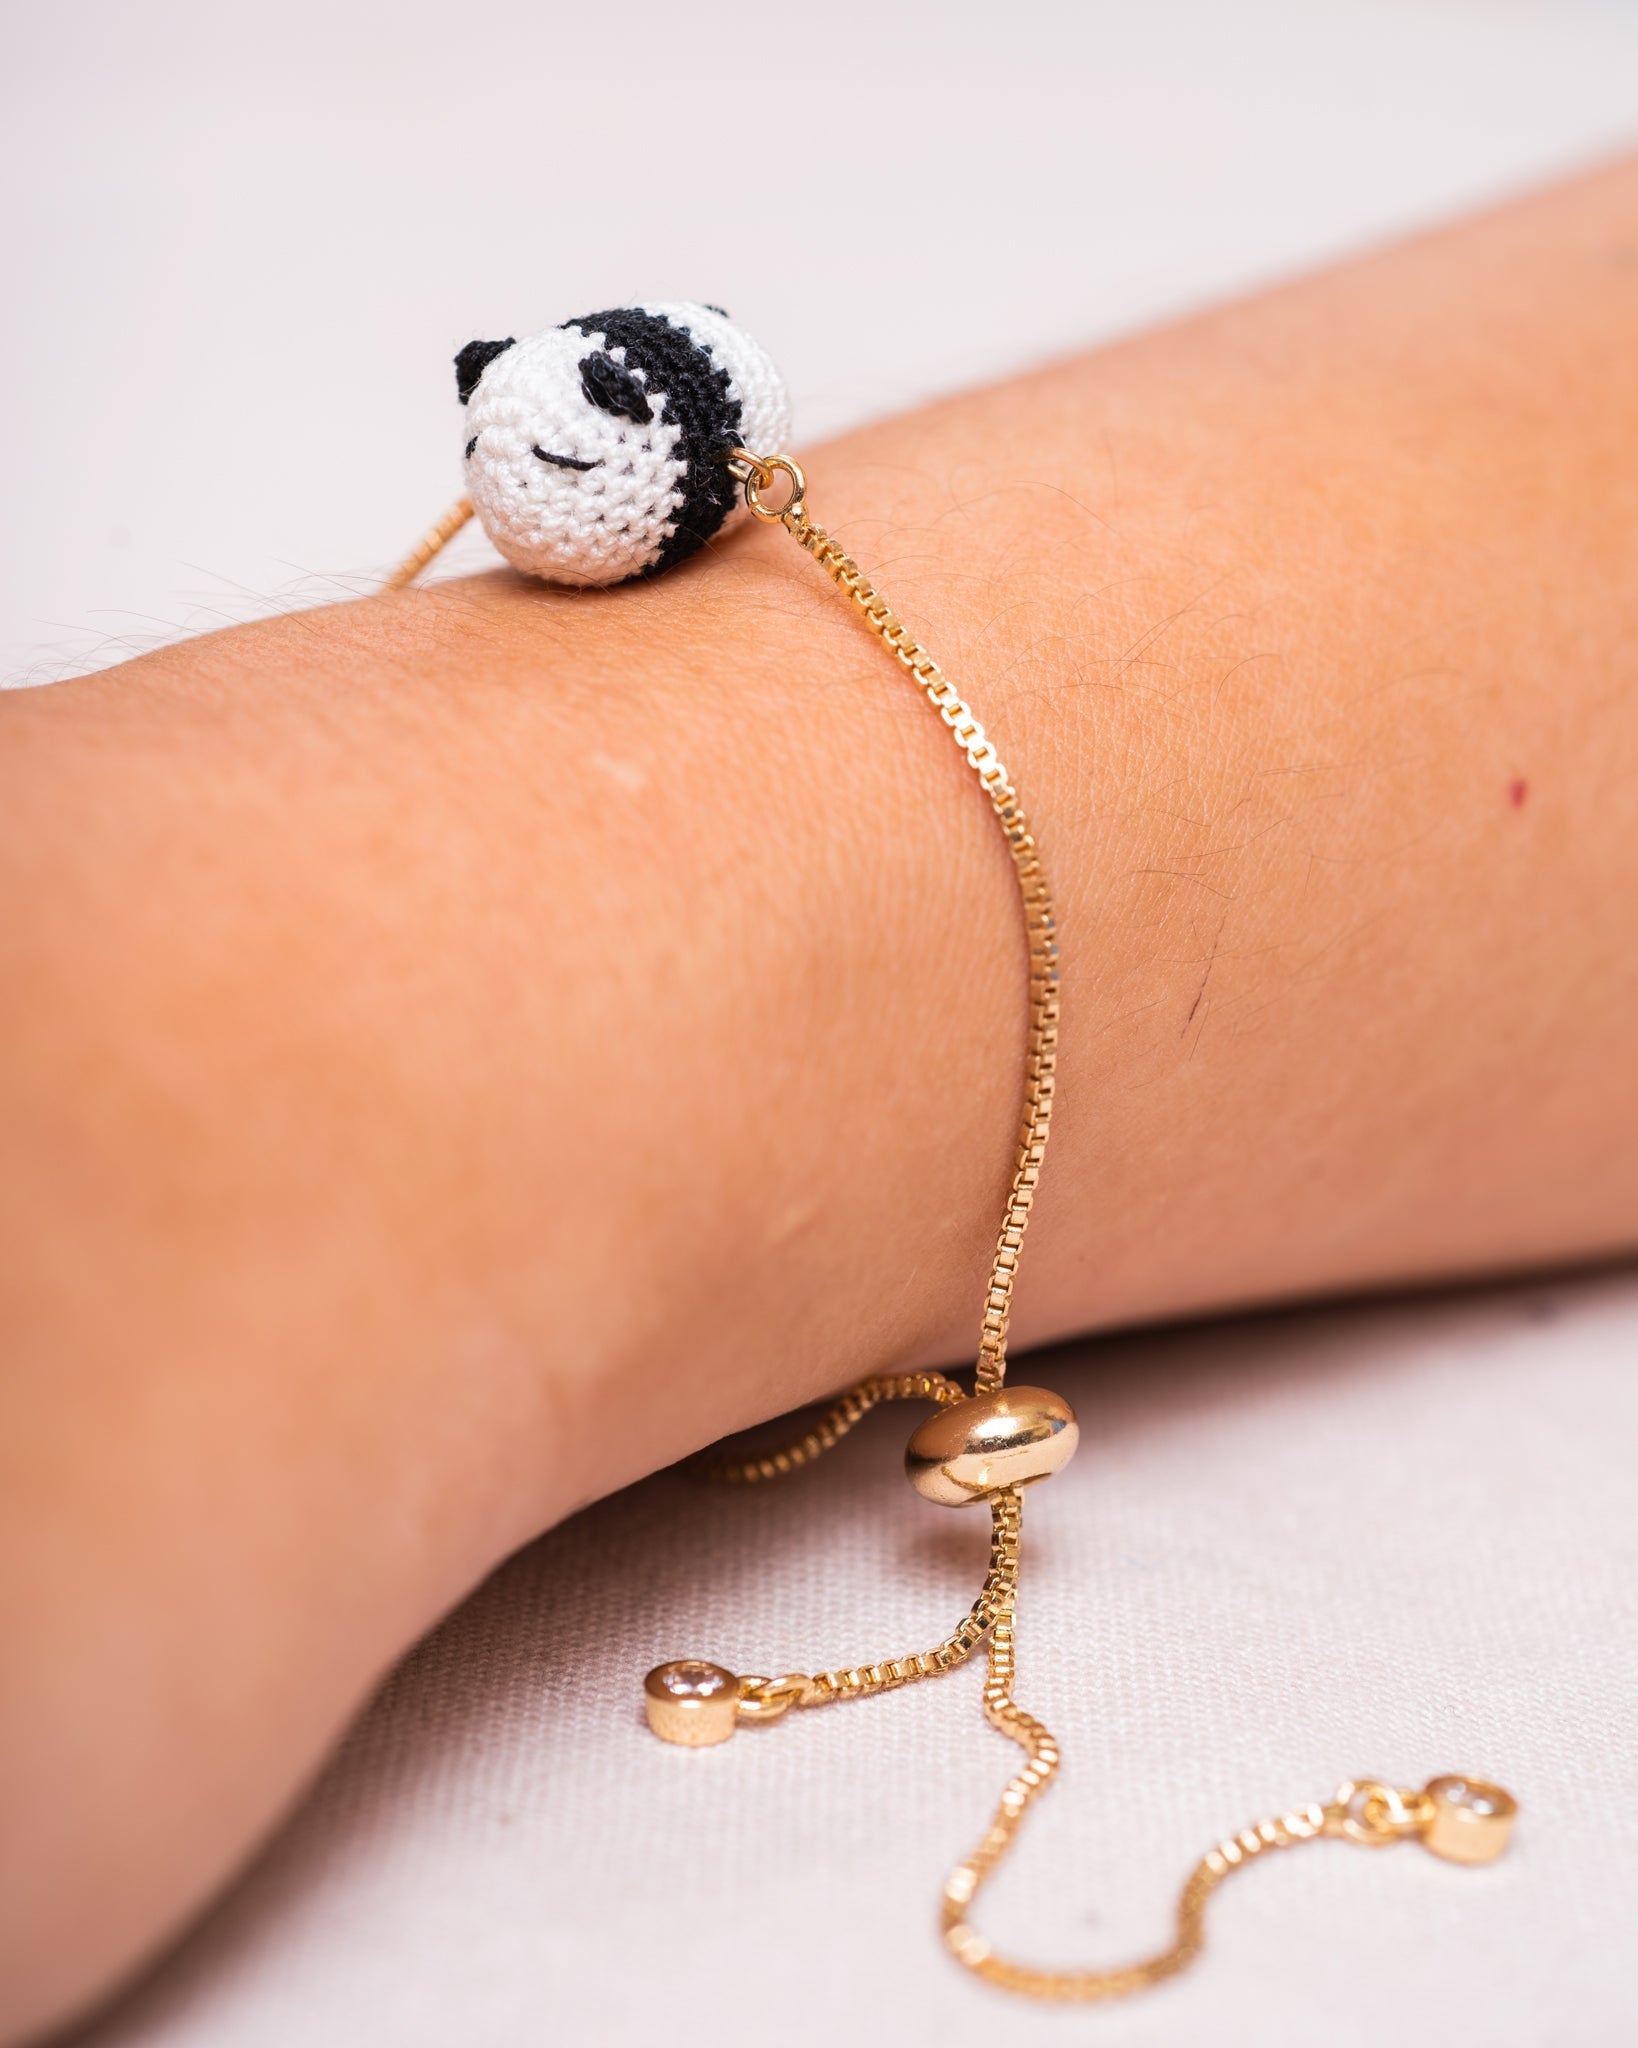 [Made to Order] Tomodachi Bracelet - Duckling